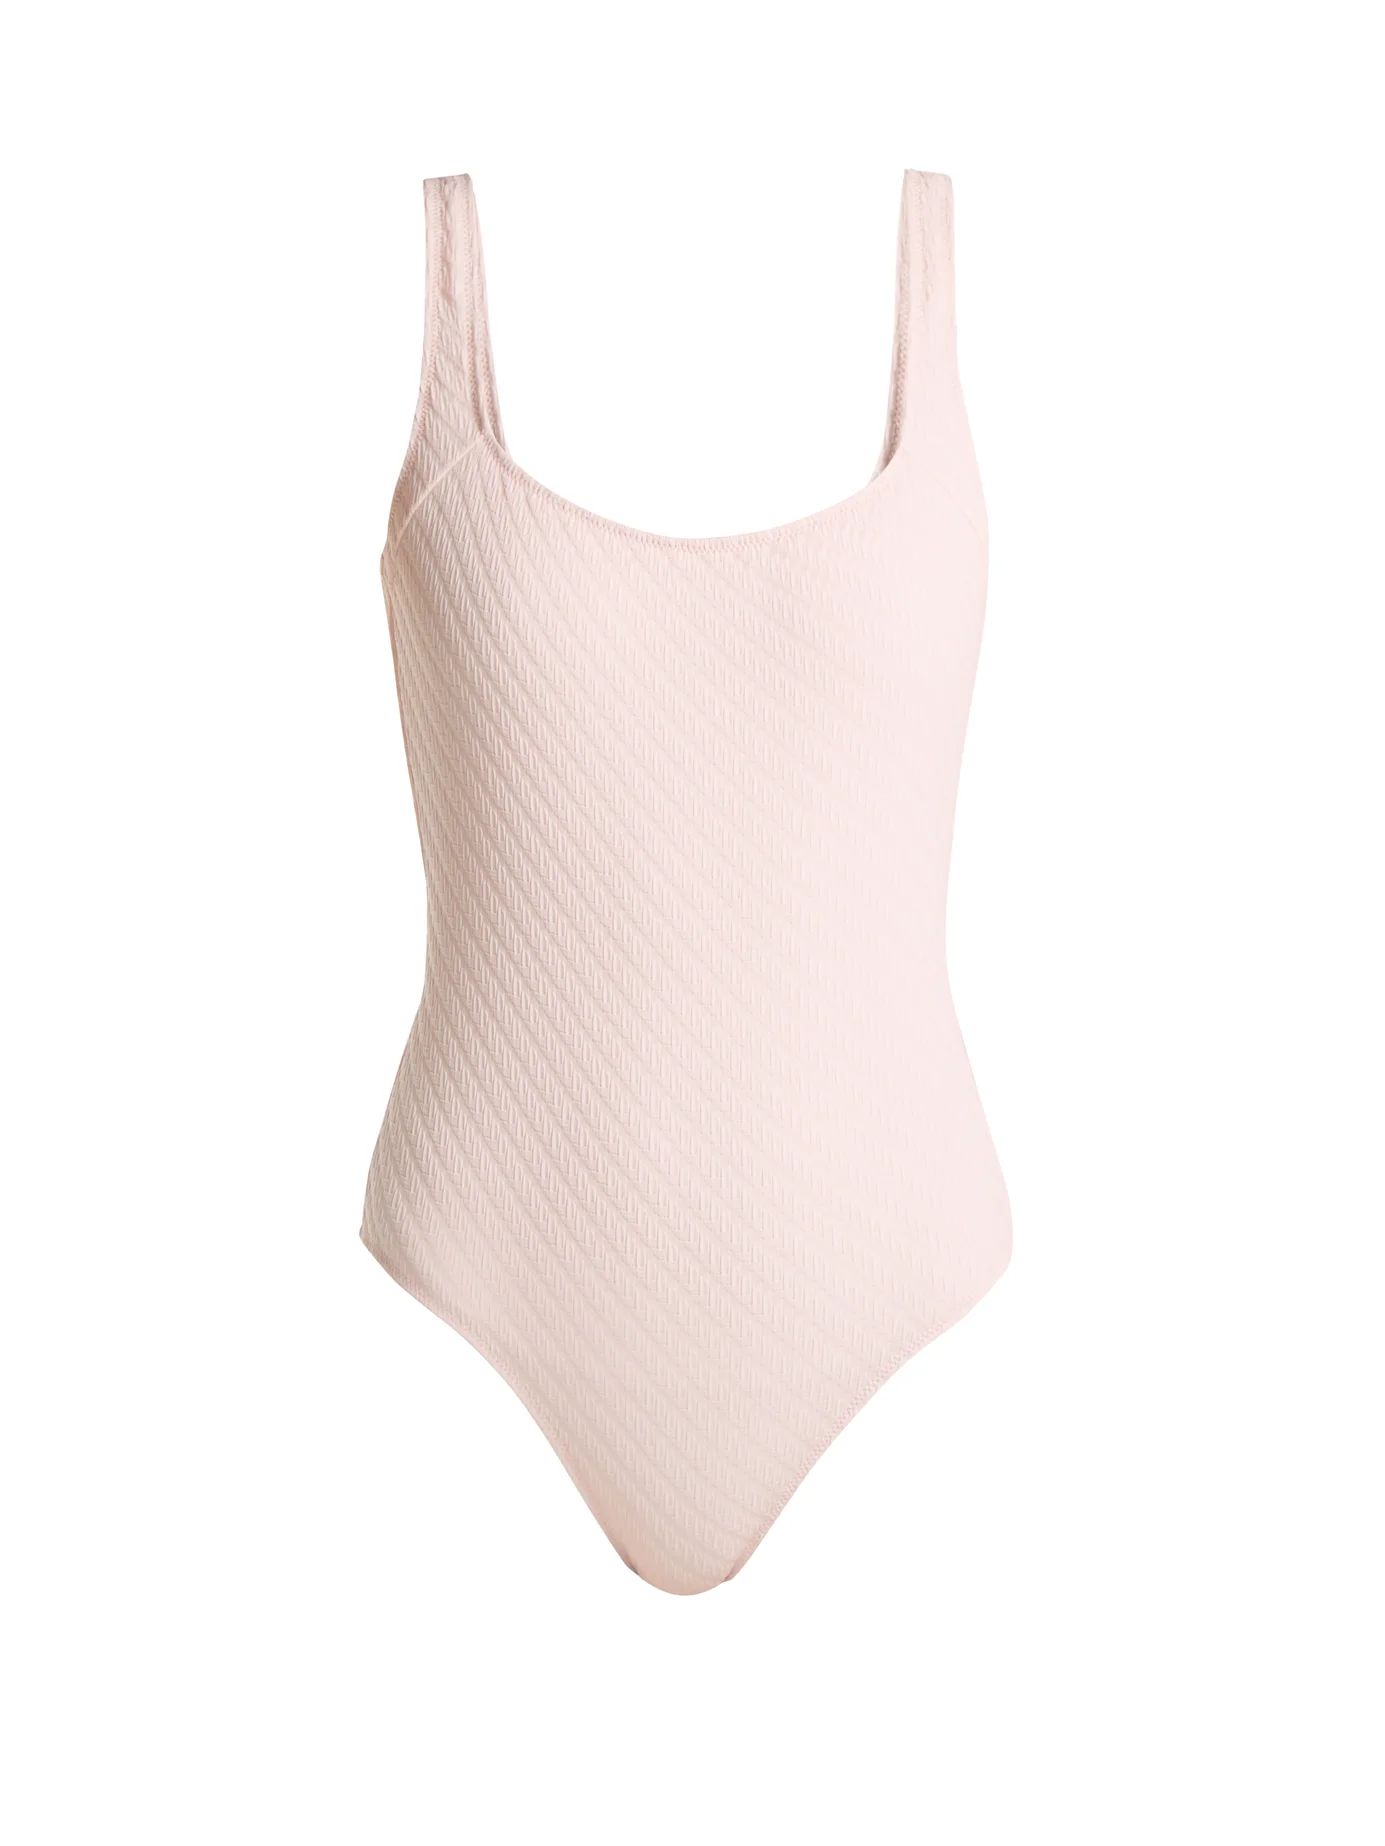 The Daisy basketweave swimsuit | Matches (US)